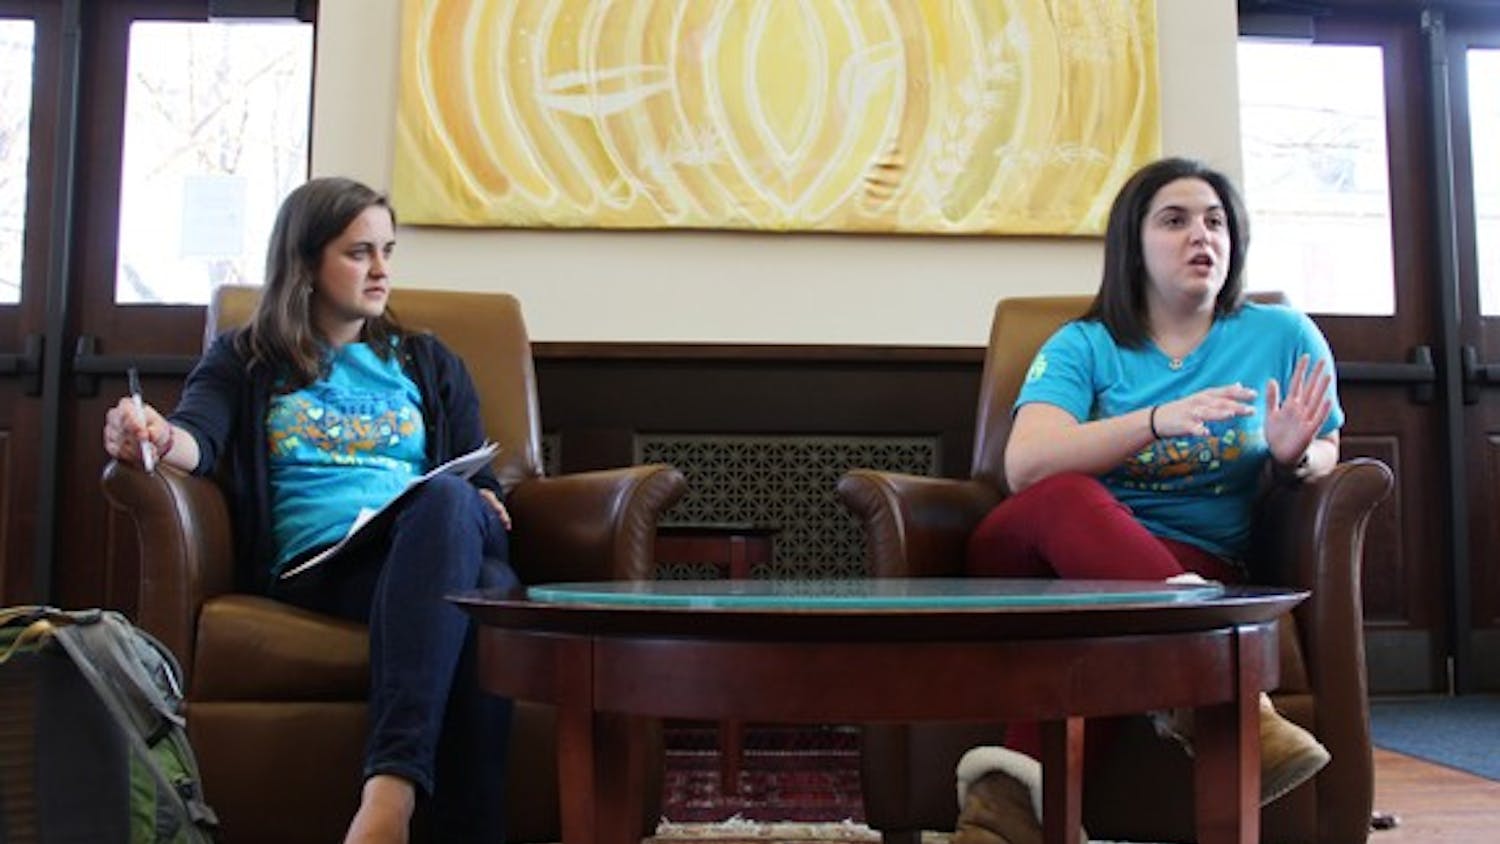 Natalie Borrego and Cora Went discuss their 2013-2014 Campus Y co-president platforms to members of the Campus Y.